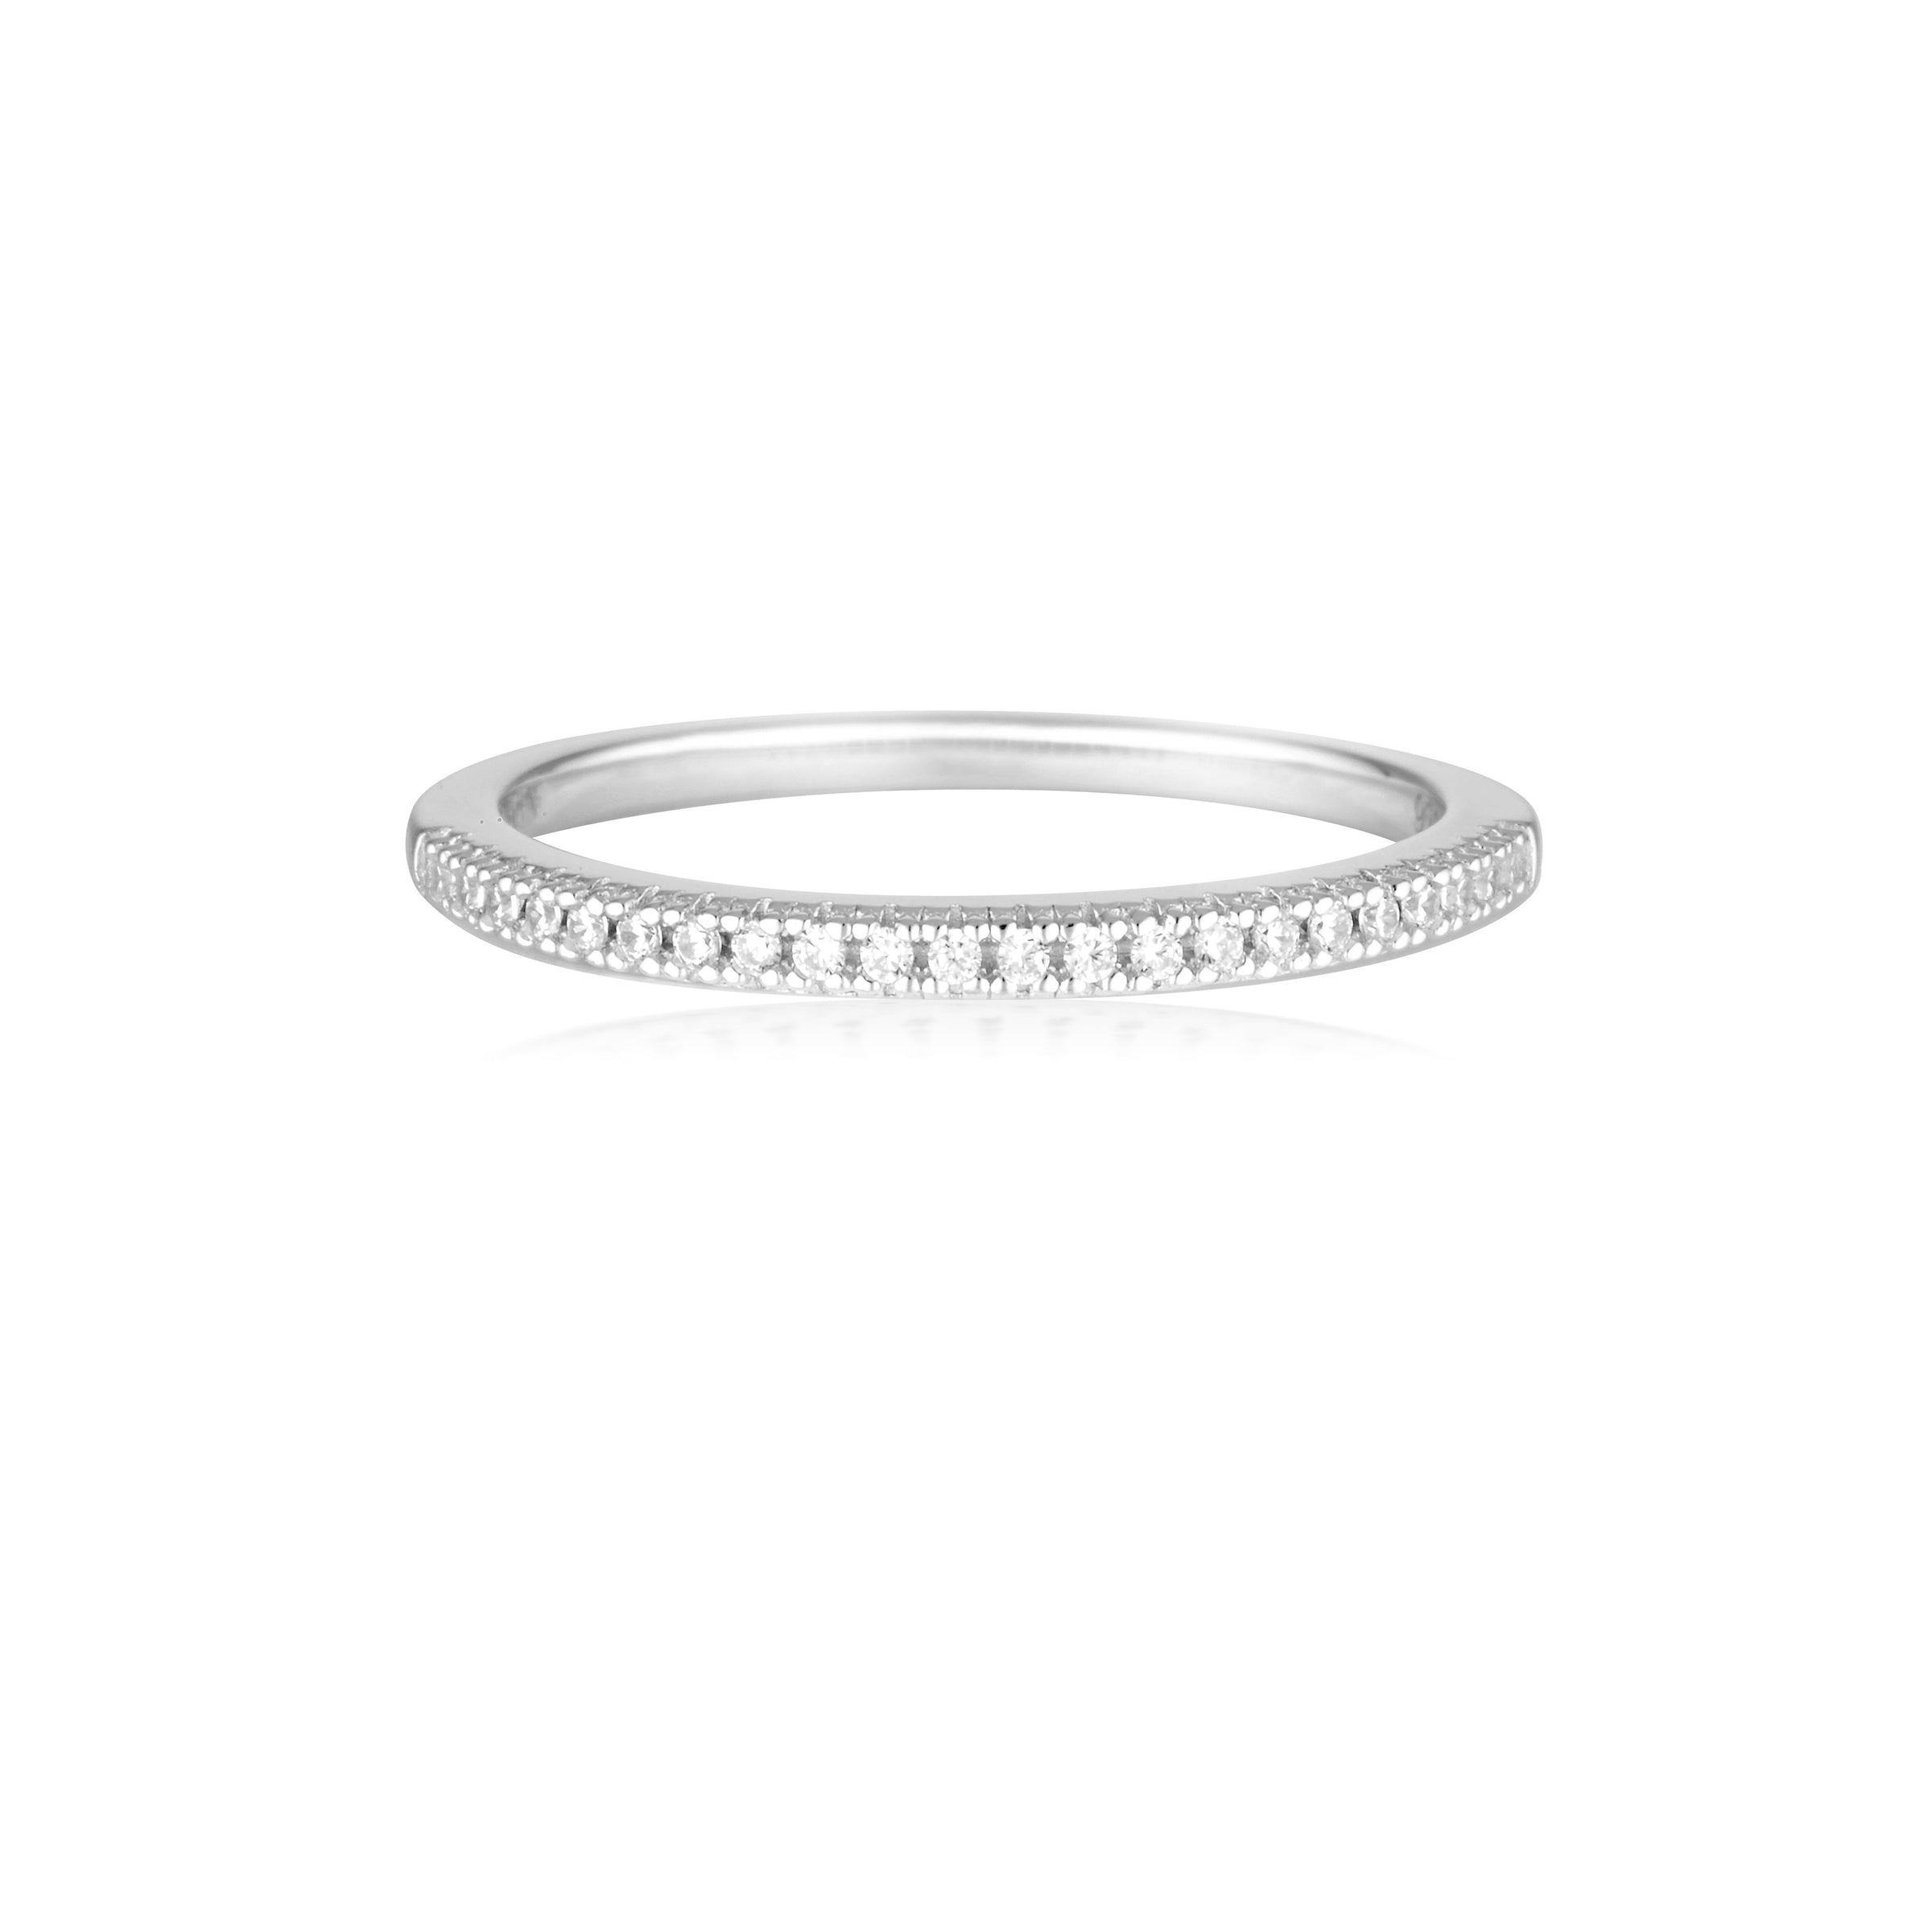 GEORGINI ICONIC BRIDAL ANNE BAND SILVER Bevilles Jewellers 